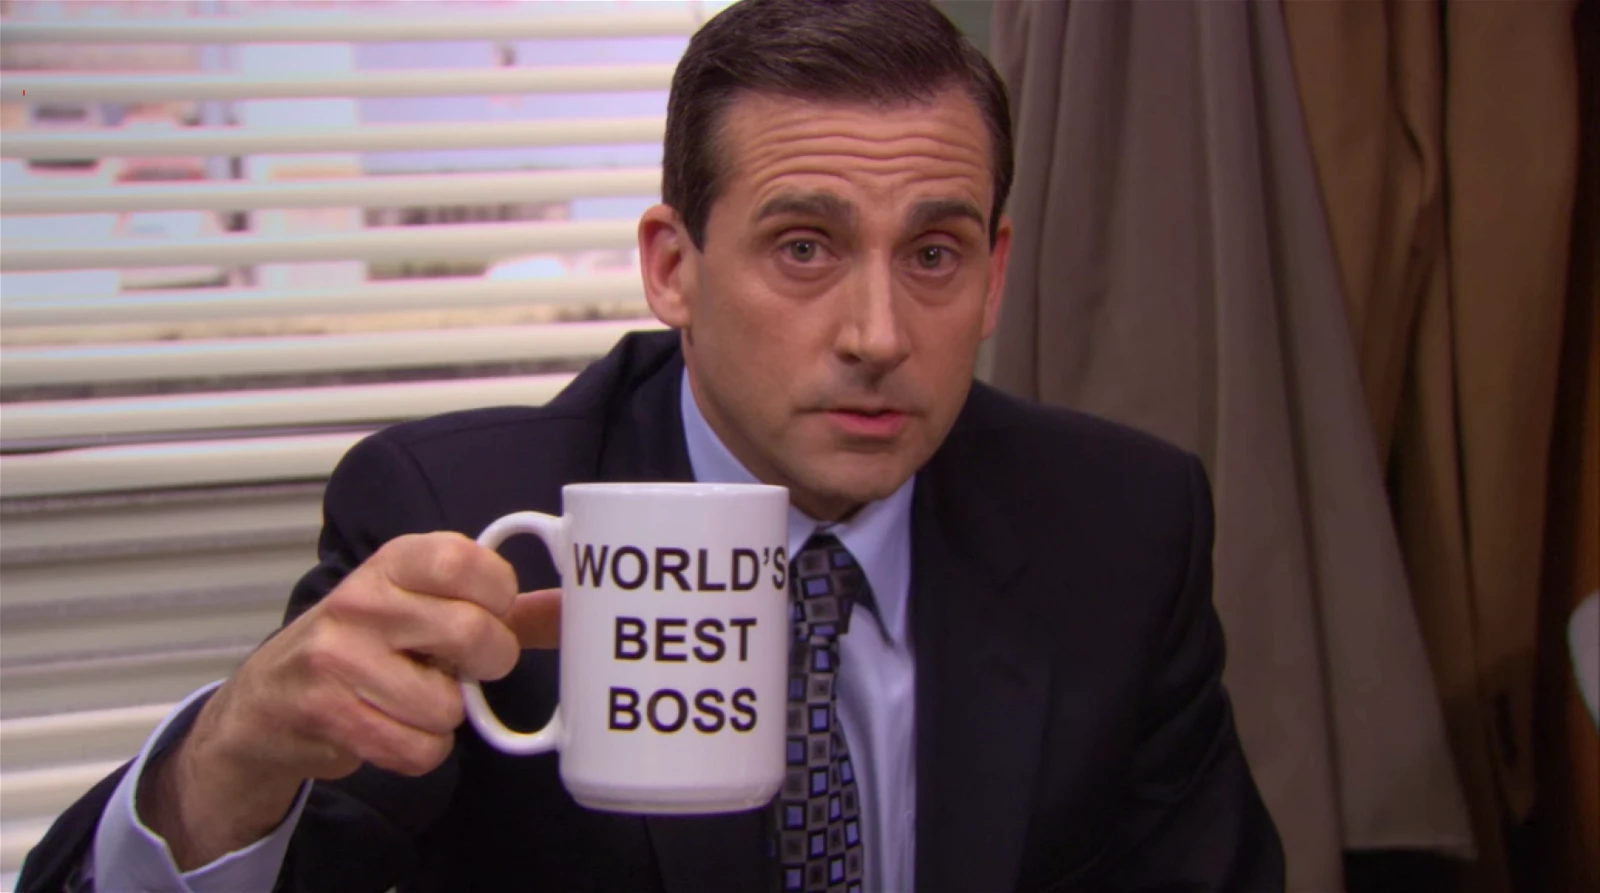 Steve Carell as Michael Scott in a still from The Office | NBC